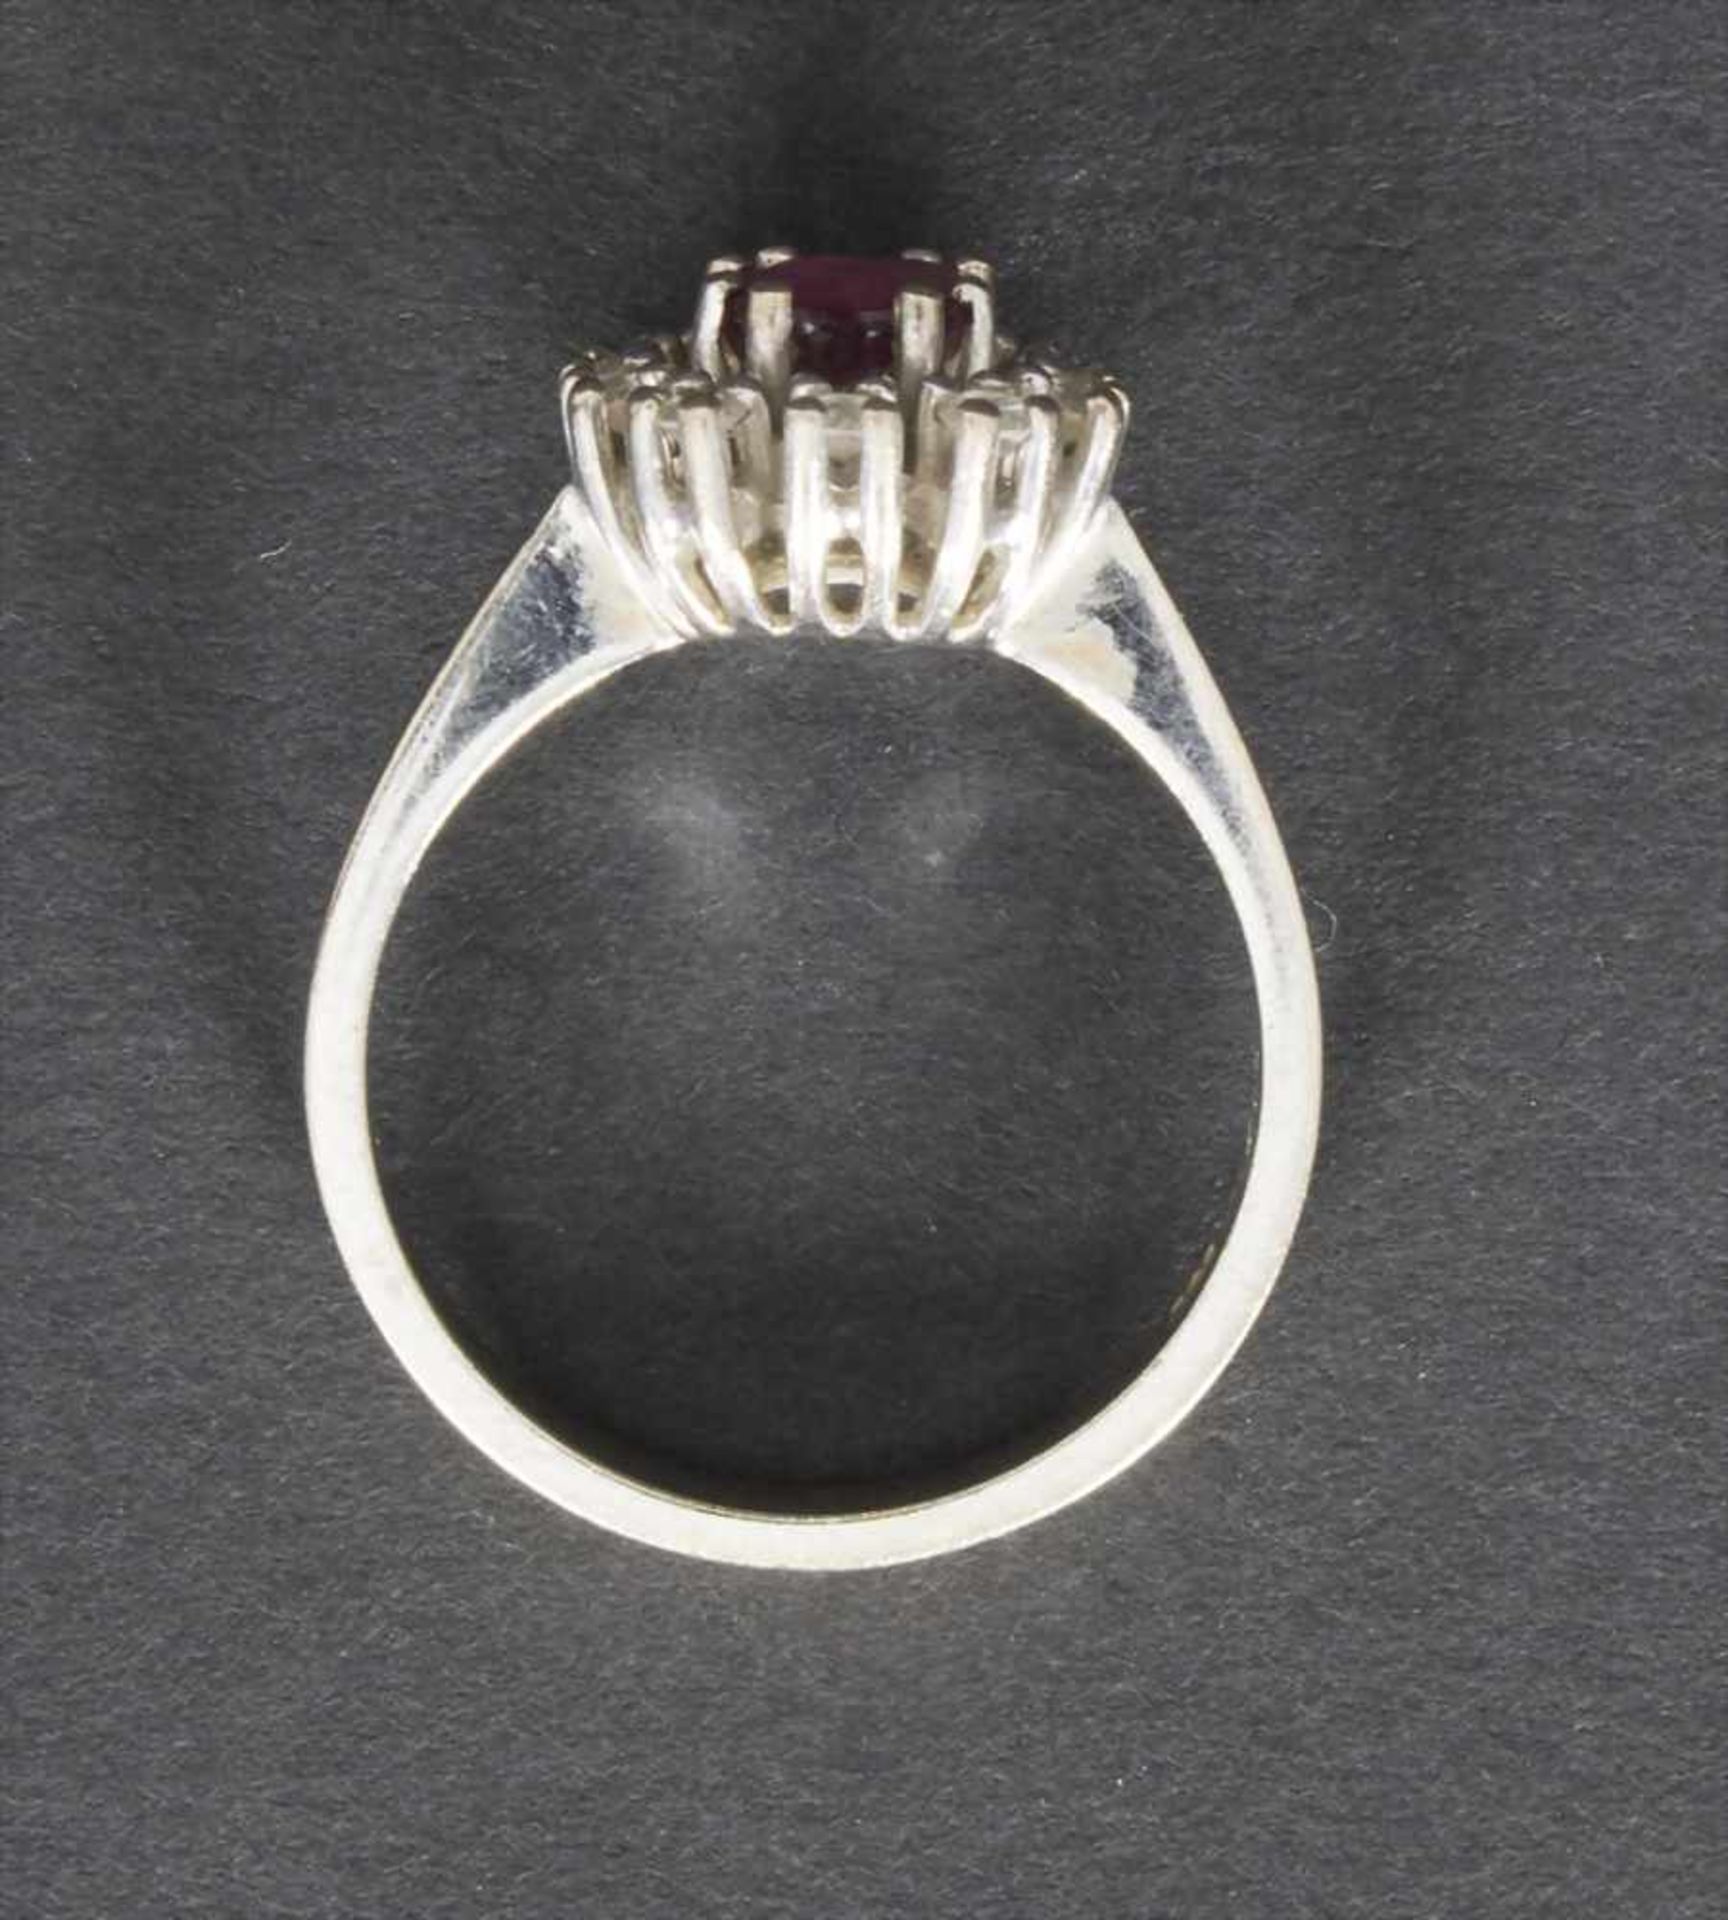 Damenring mit Diamanten und Rubin / A ladies ring with diamonds and red rubyMaterial: WG 585/000, - Image 3 of 3